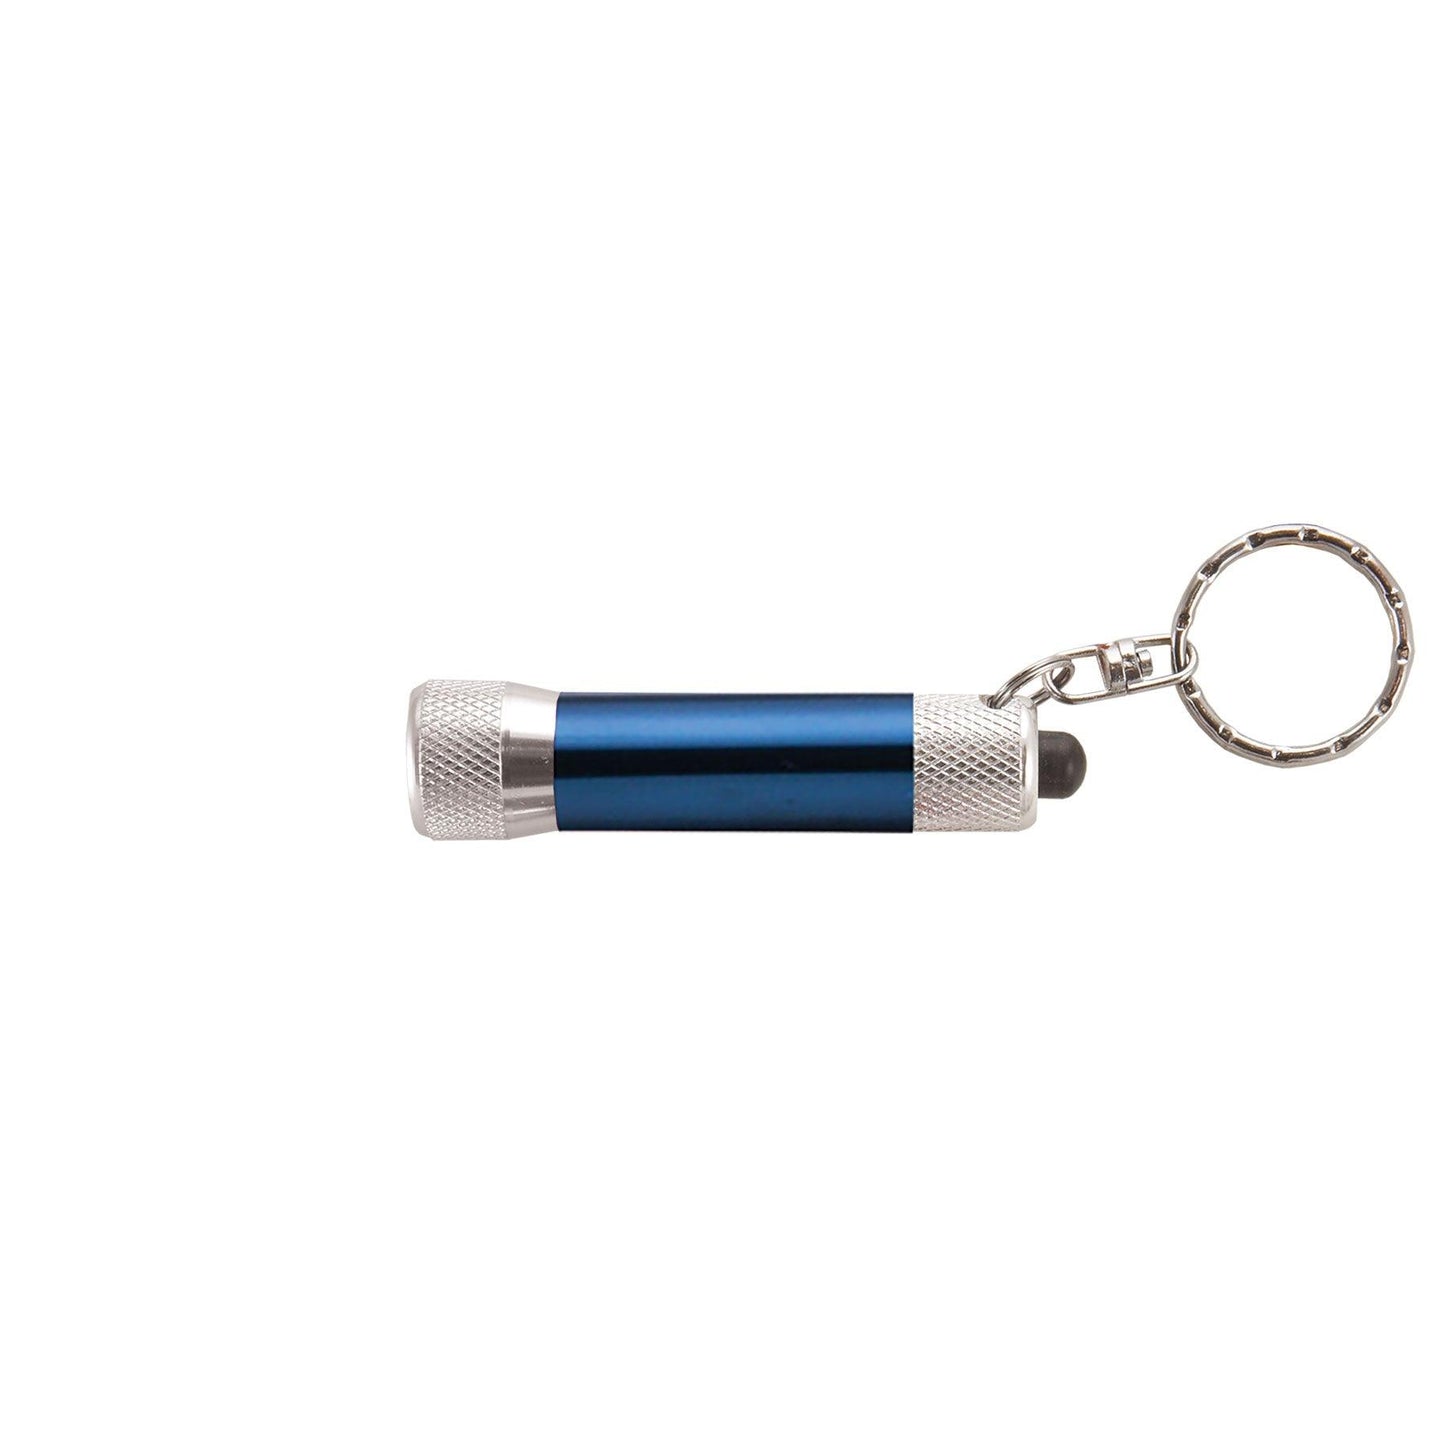 Navy Promotional Led keychain - Persopens Promotional Products LTD